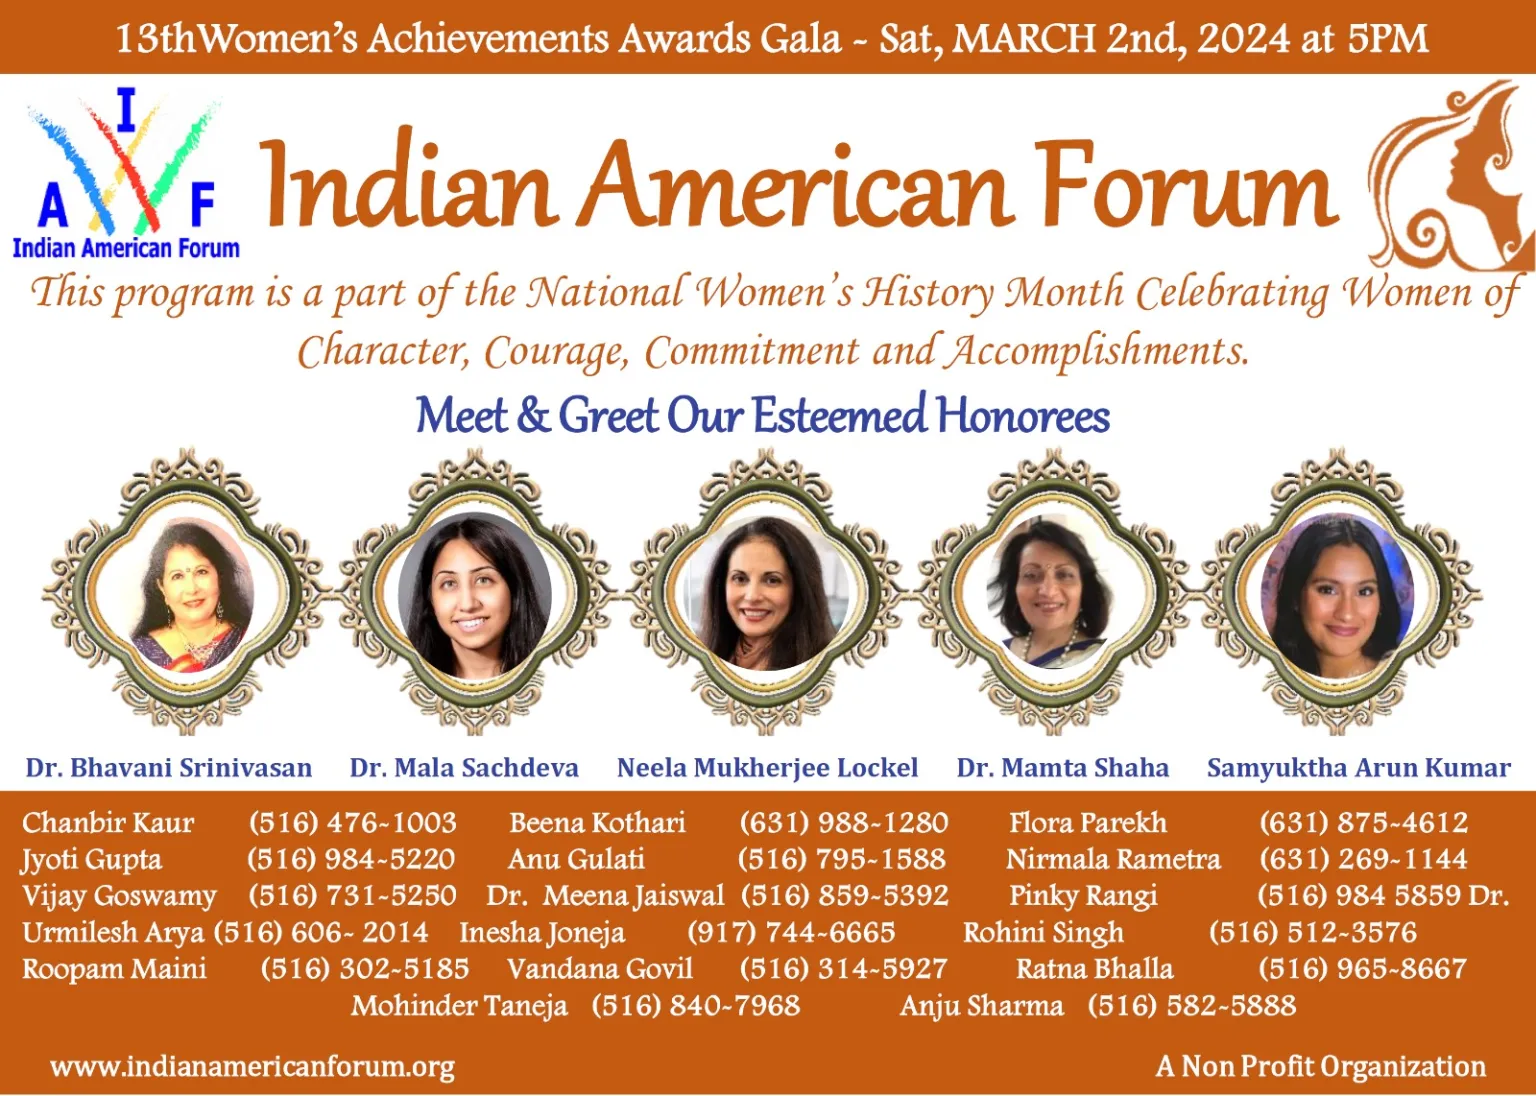 Indian American Forum honors women achievers at annual awards gala